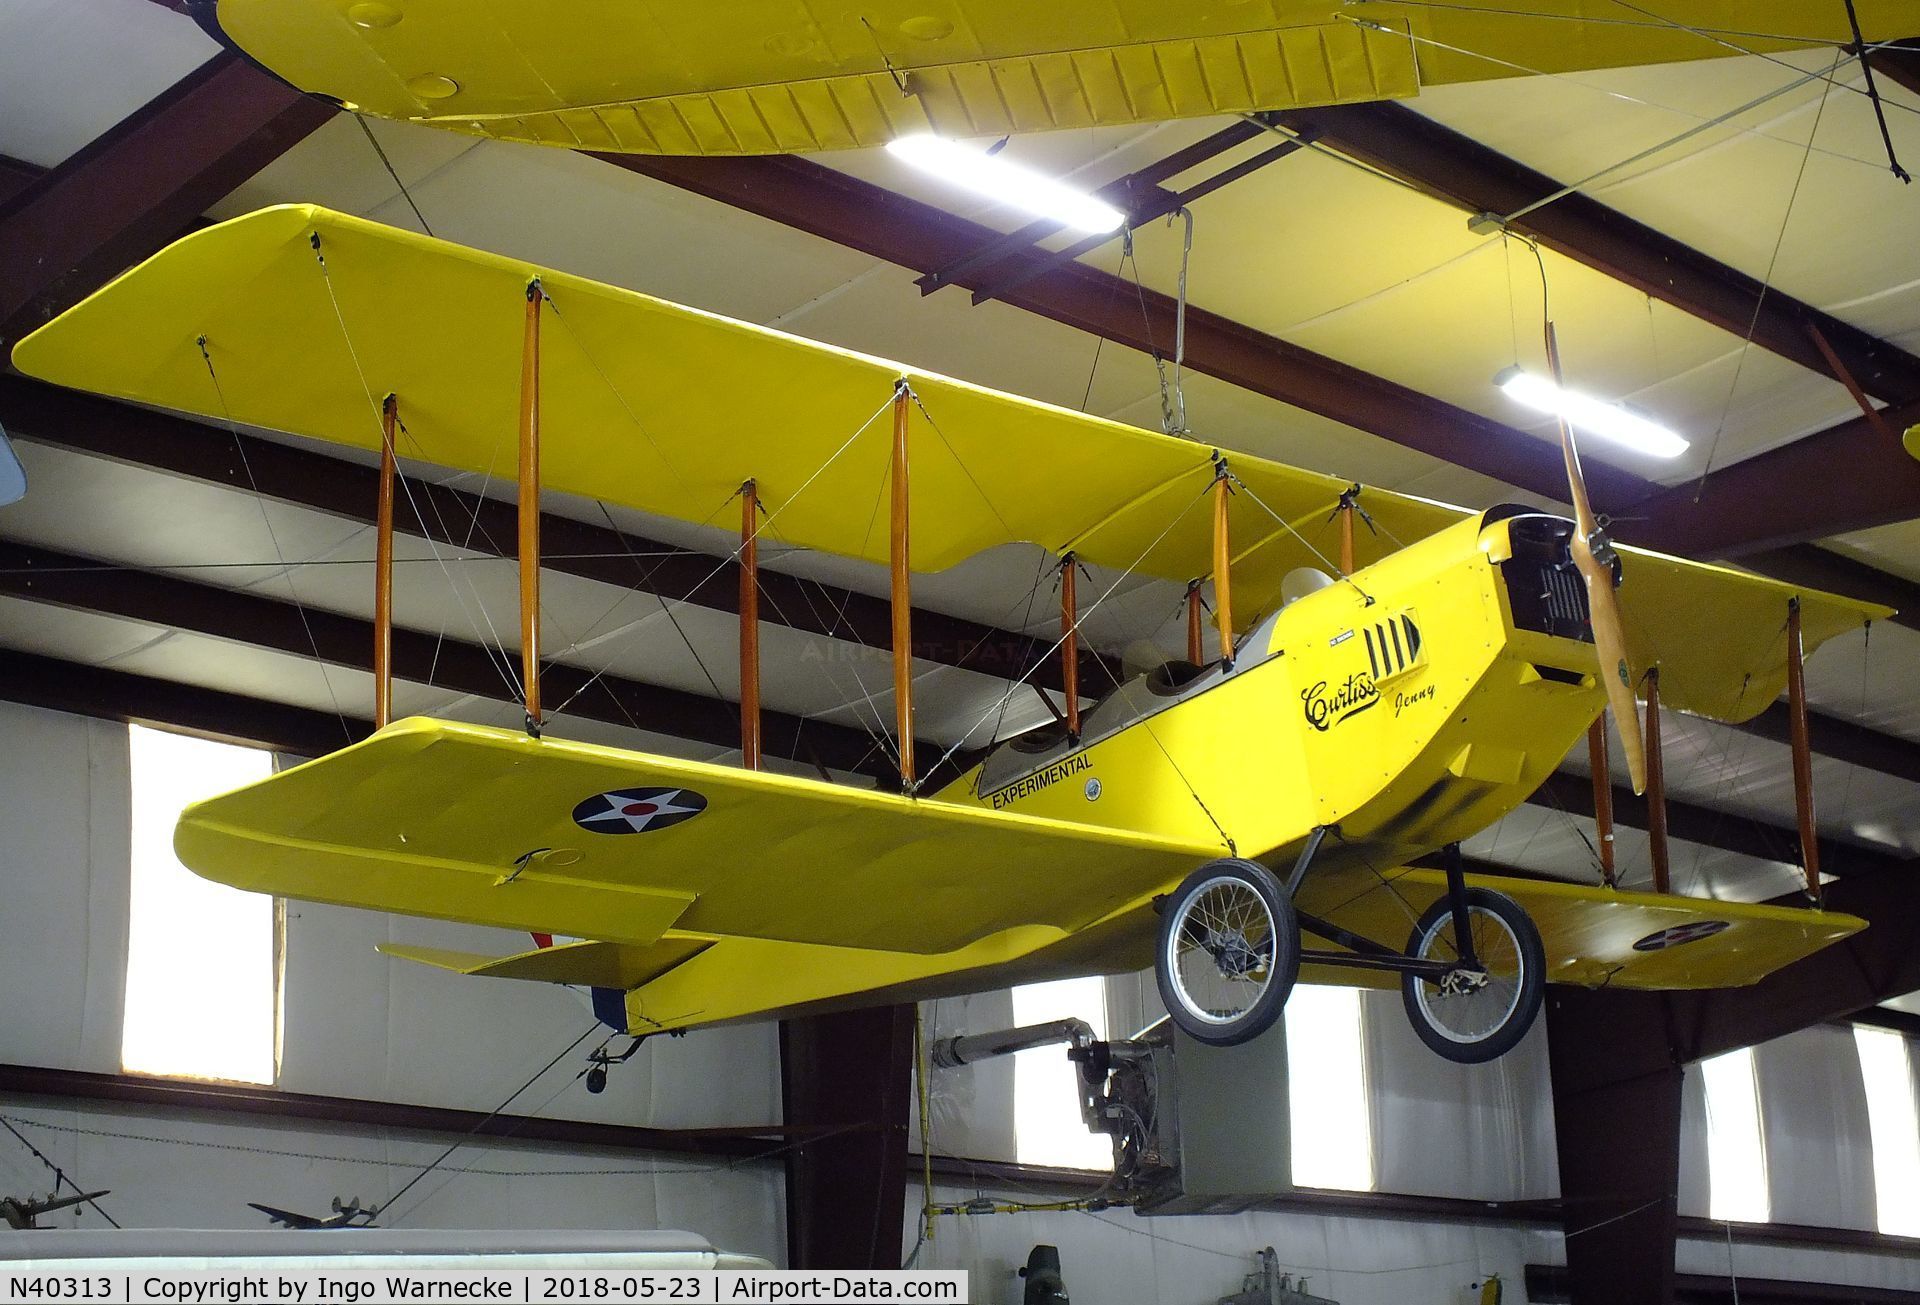 N40313, 2003 Curtiss JN-4D Replica C/N 556, Early Bird (Waddell, Donald R) Curtiss JN-4D 'Jenny' 2/3-scale replica at the Western North Carolina Air Museum, Hendersonville NC